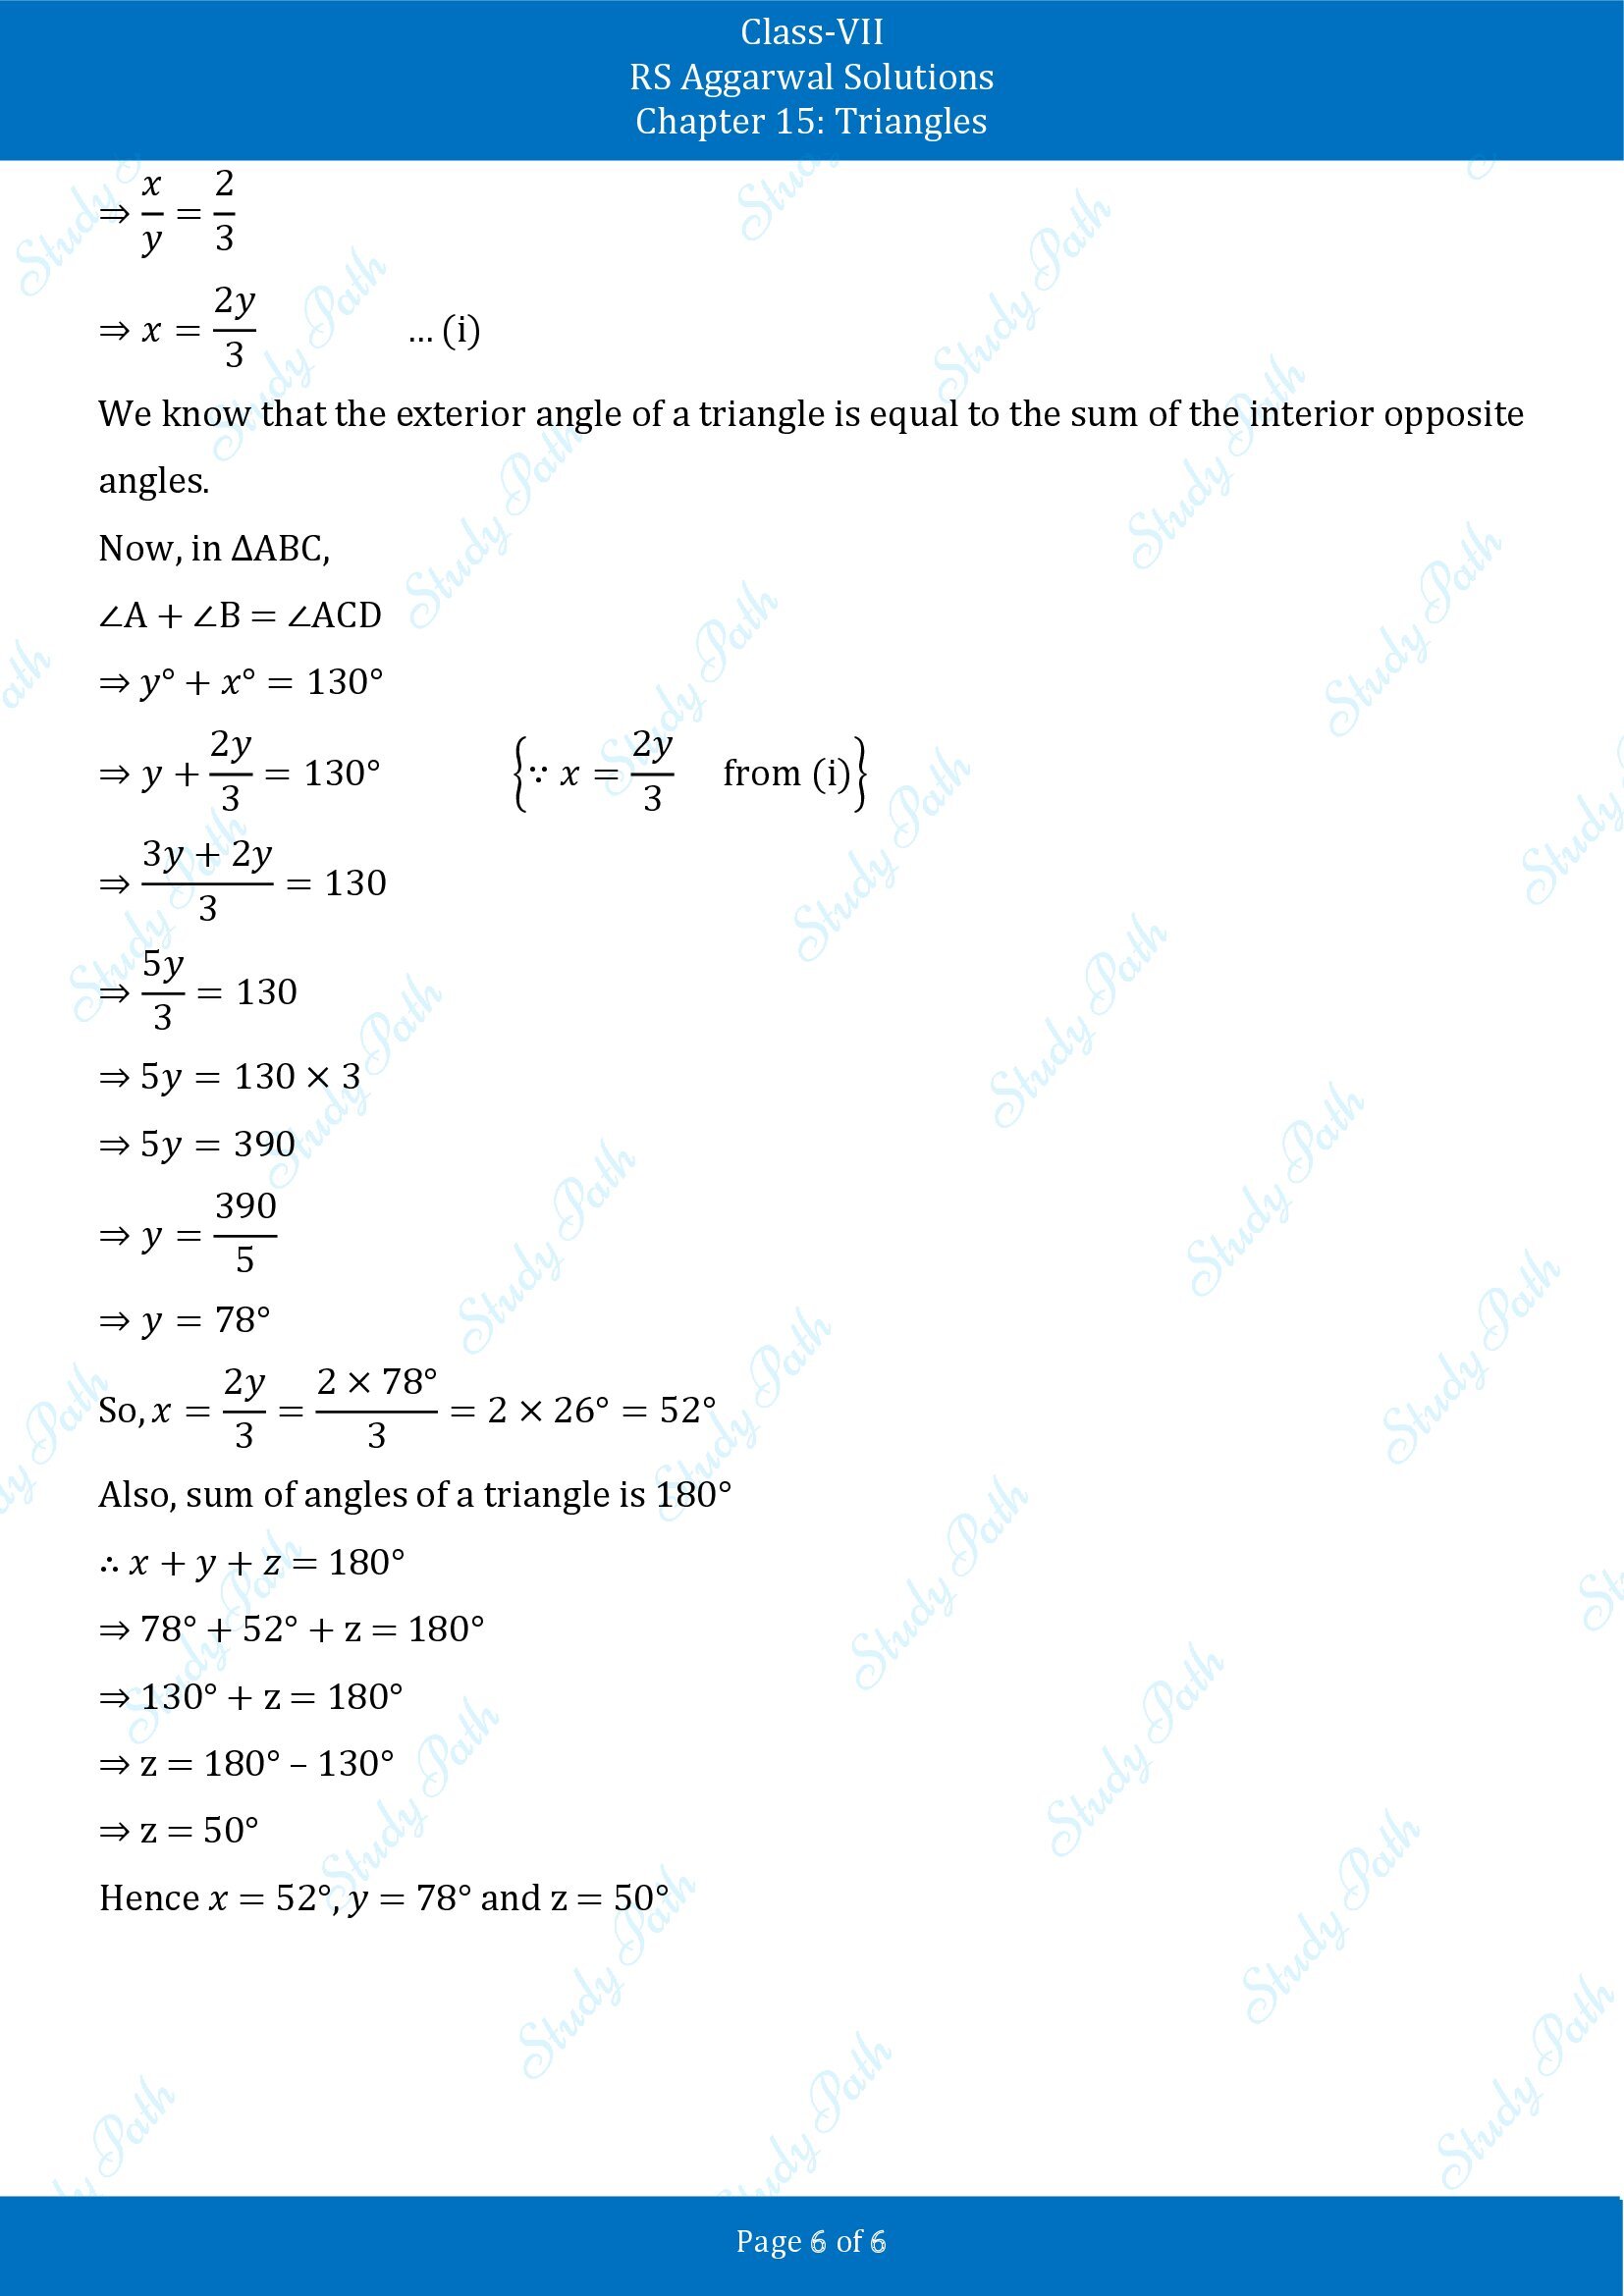 RS Aggarwal Solutions Class 7 Chapter 15 Triangles Exercise 15B 00006